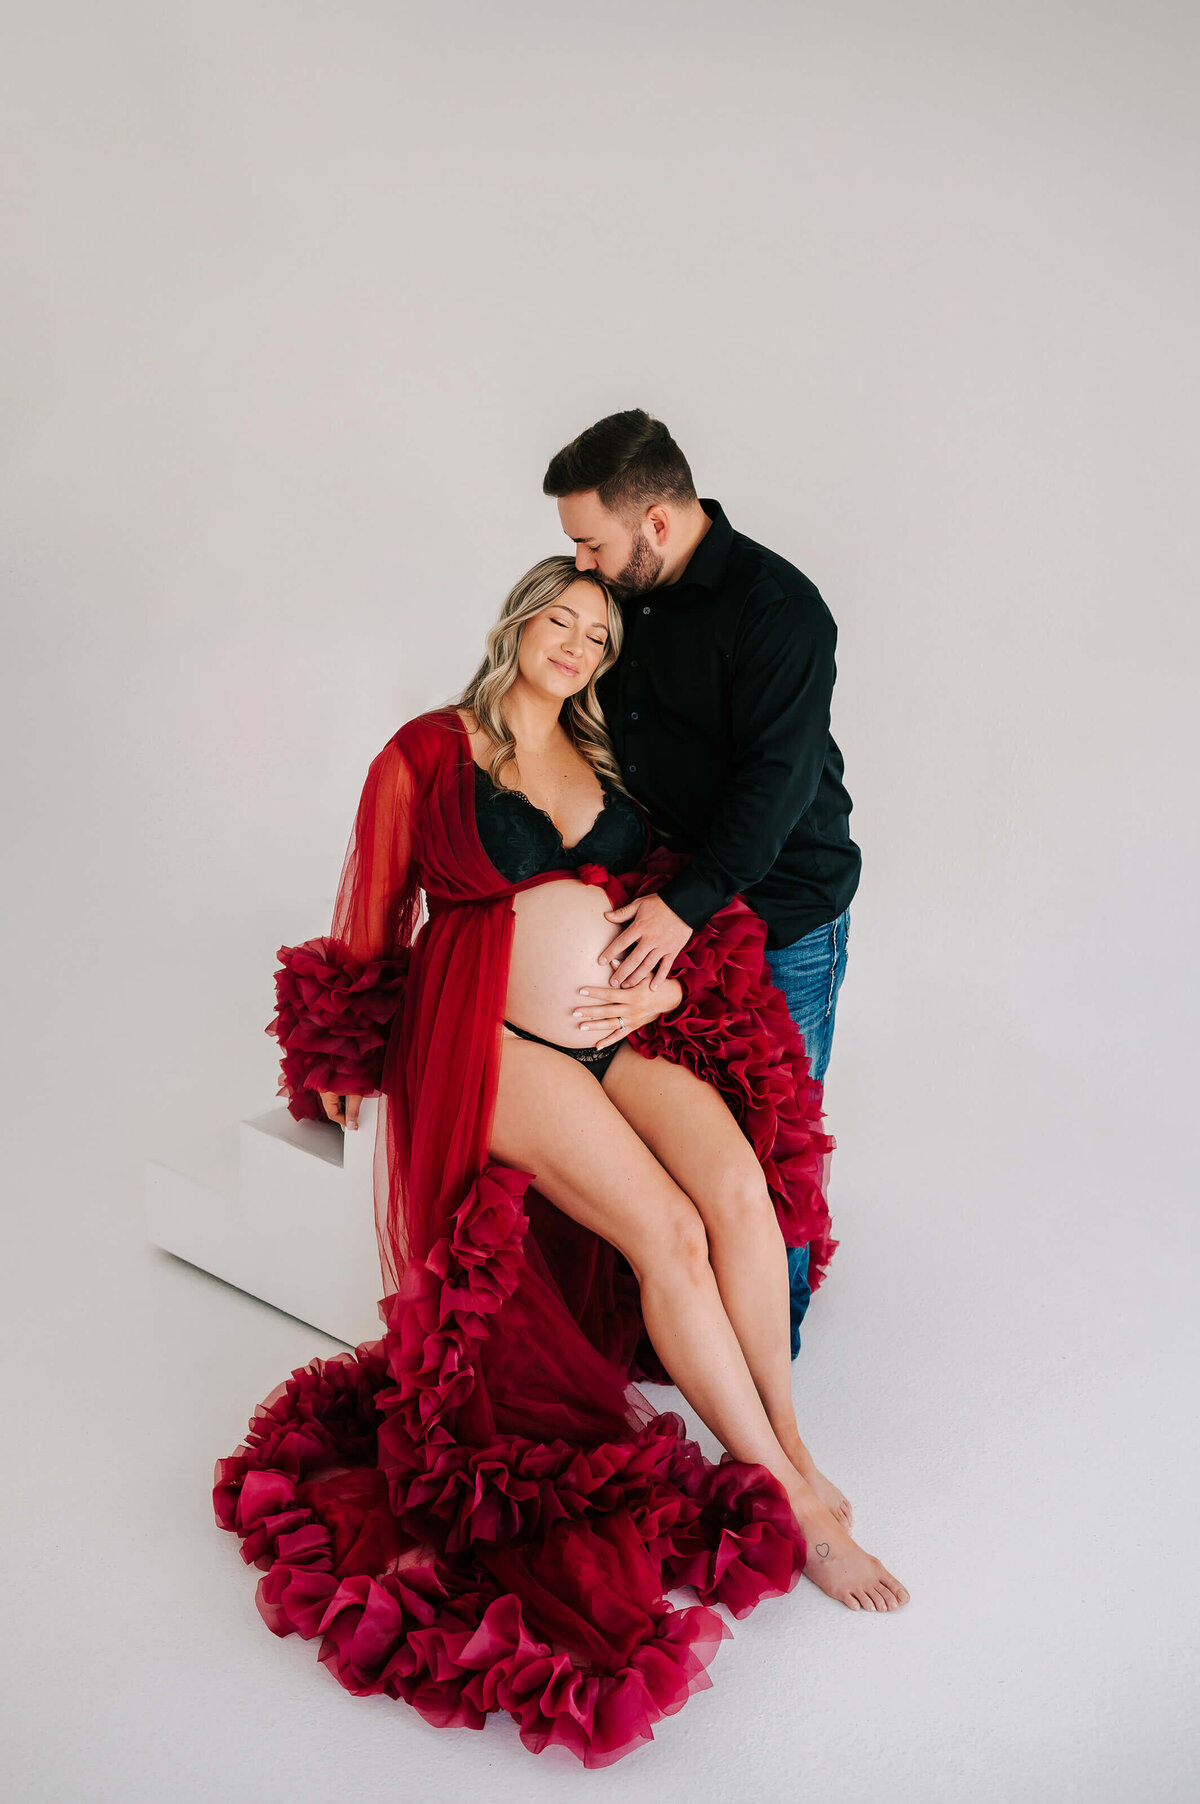 Branson Missouri maternity photographer Jessica Kennedy of The XO Photography caprures husband kissing pregnant wife's forehead